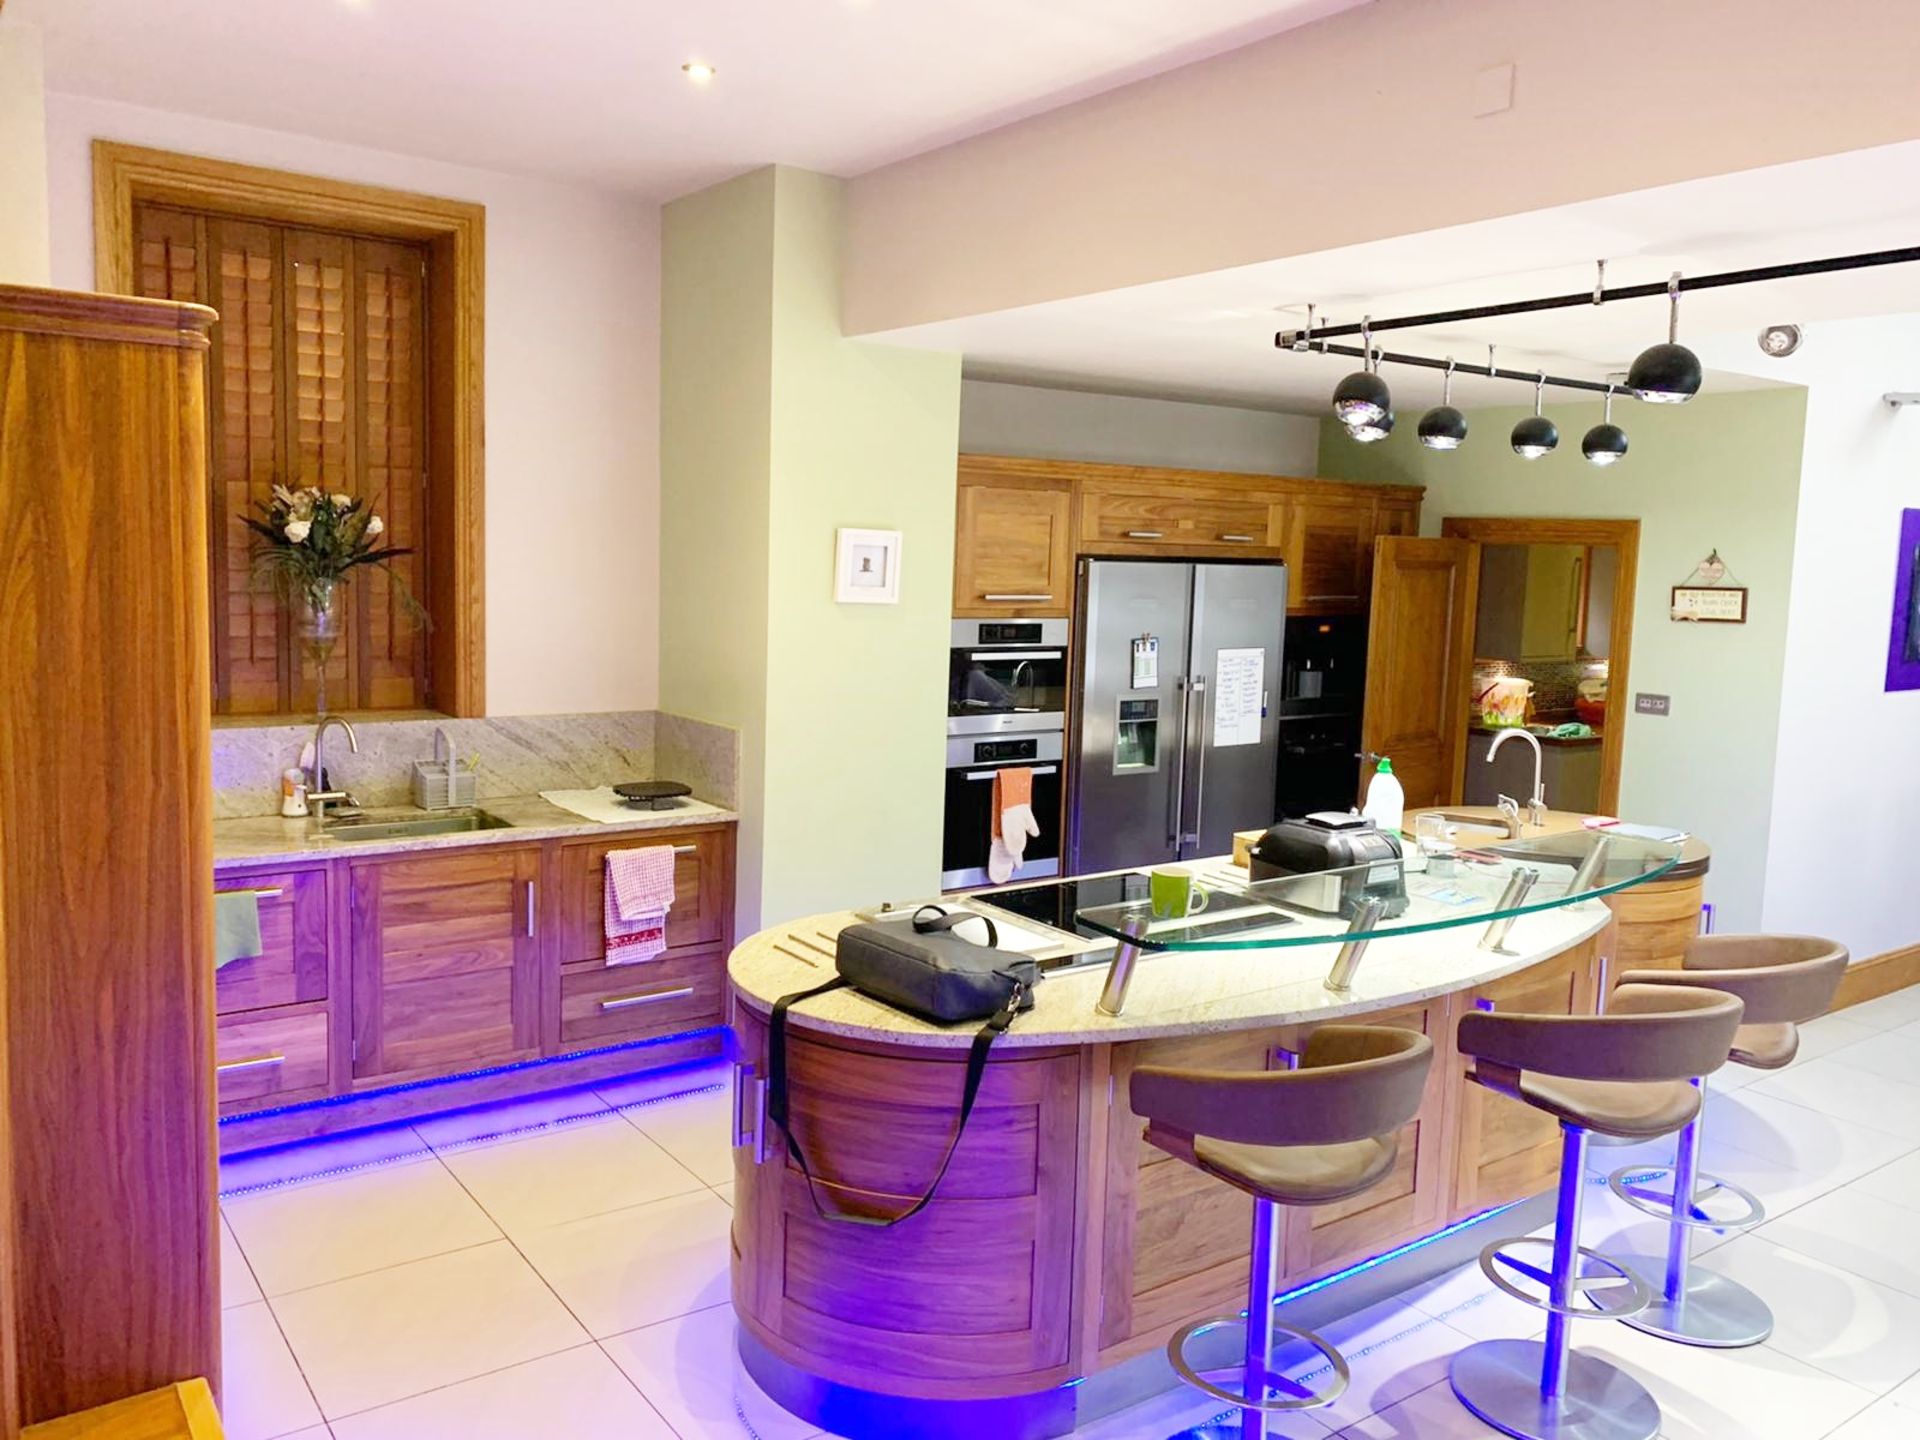 1 x Bespoke Curved Fitted Kitchen With Solid Wood Walnut Doors, Integrated Appliances, Granite Tops - Image 14 of 147